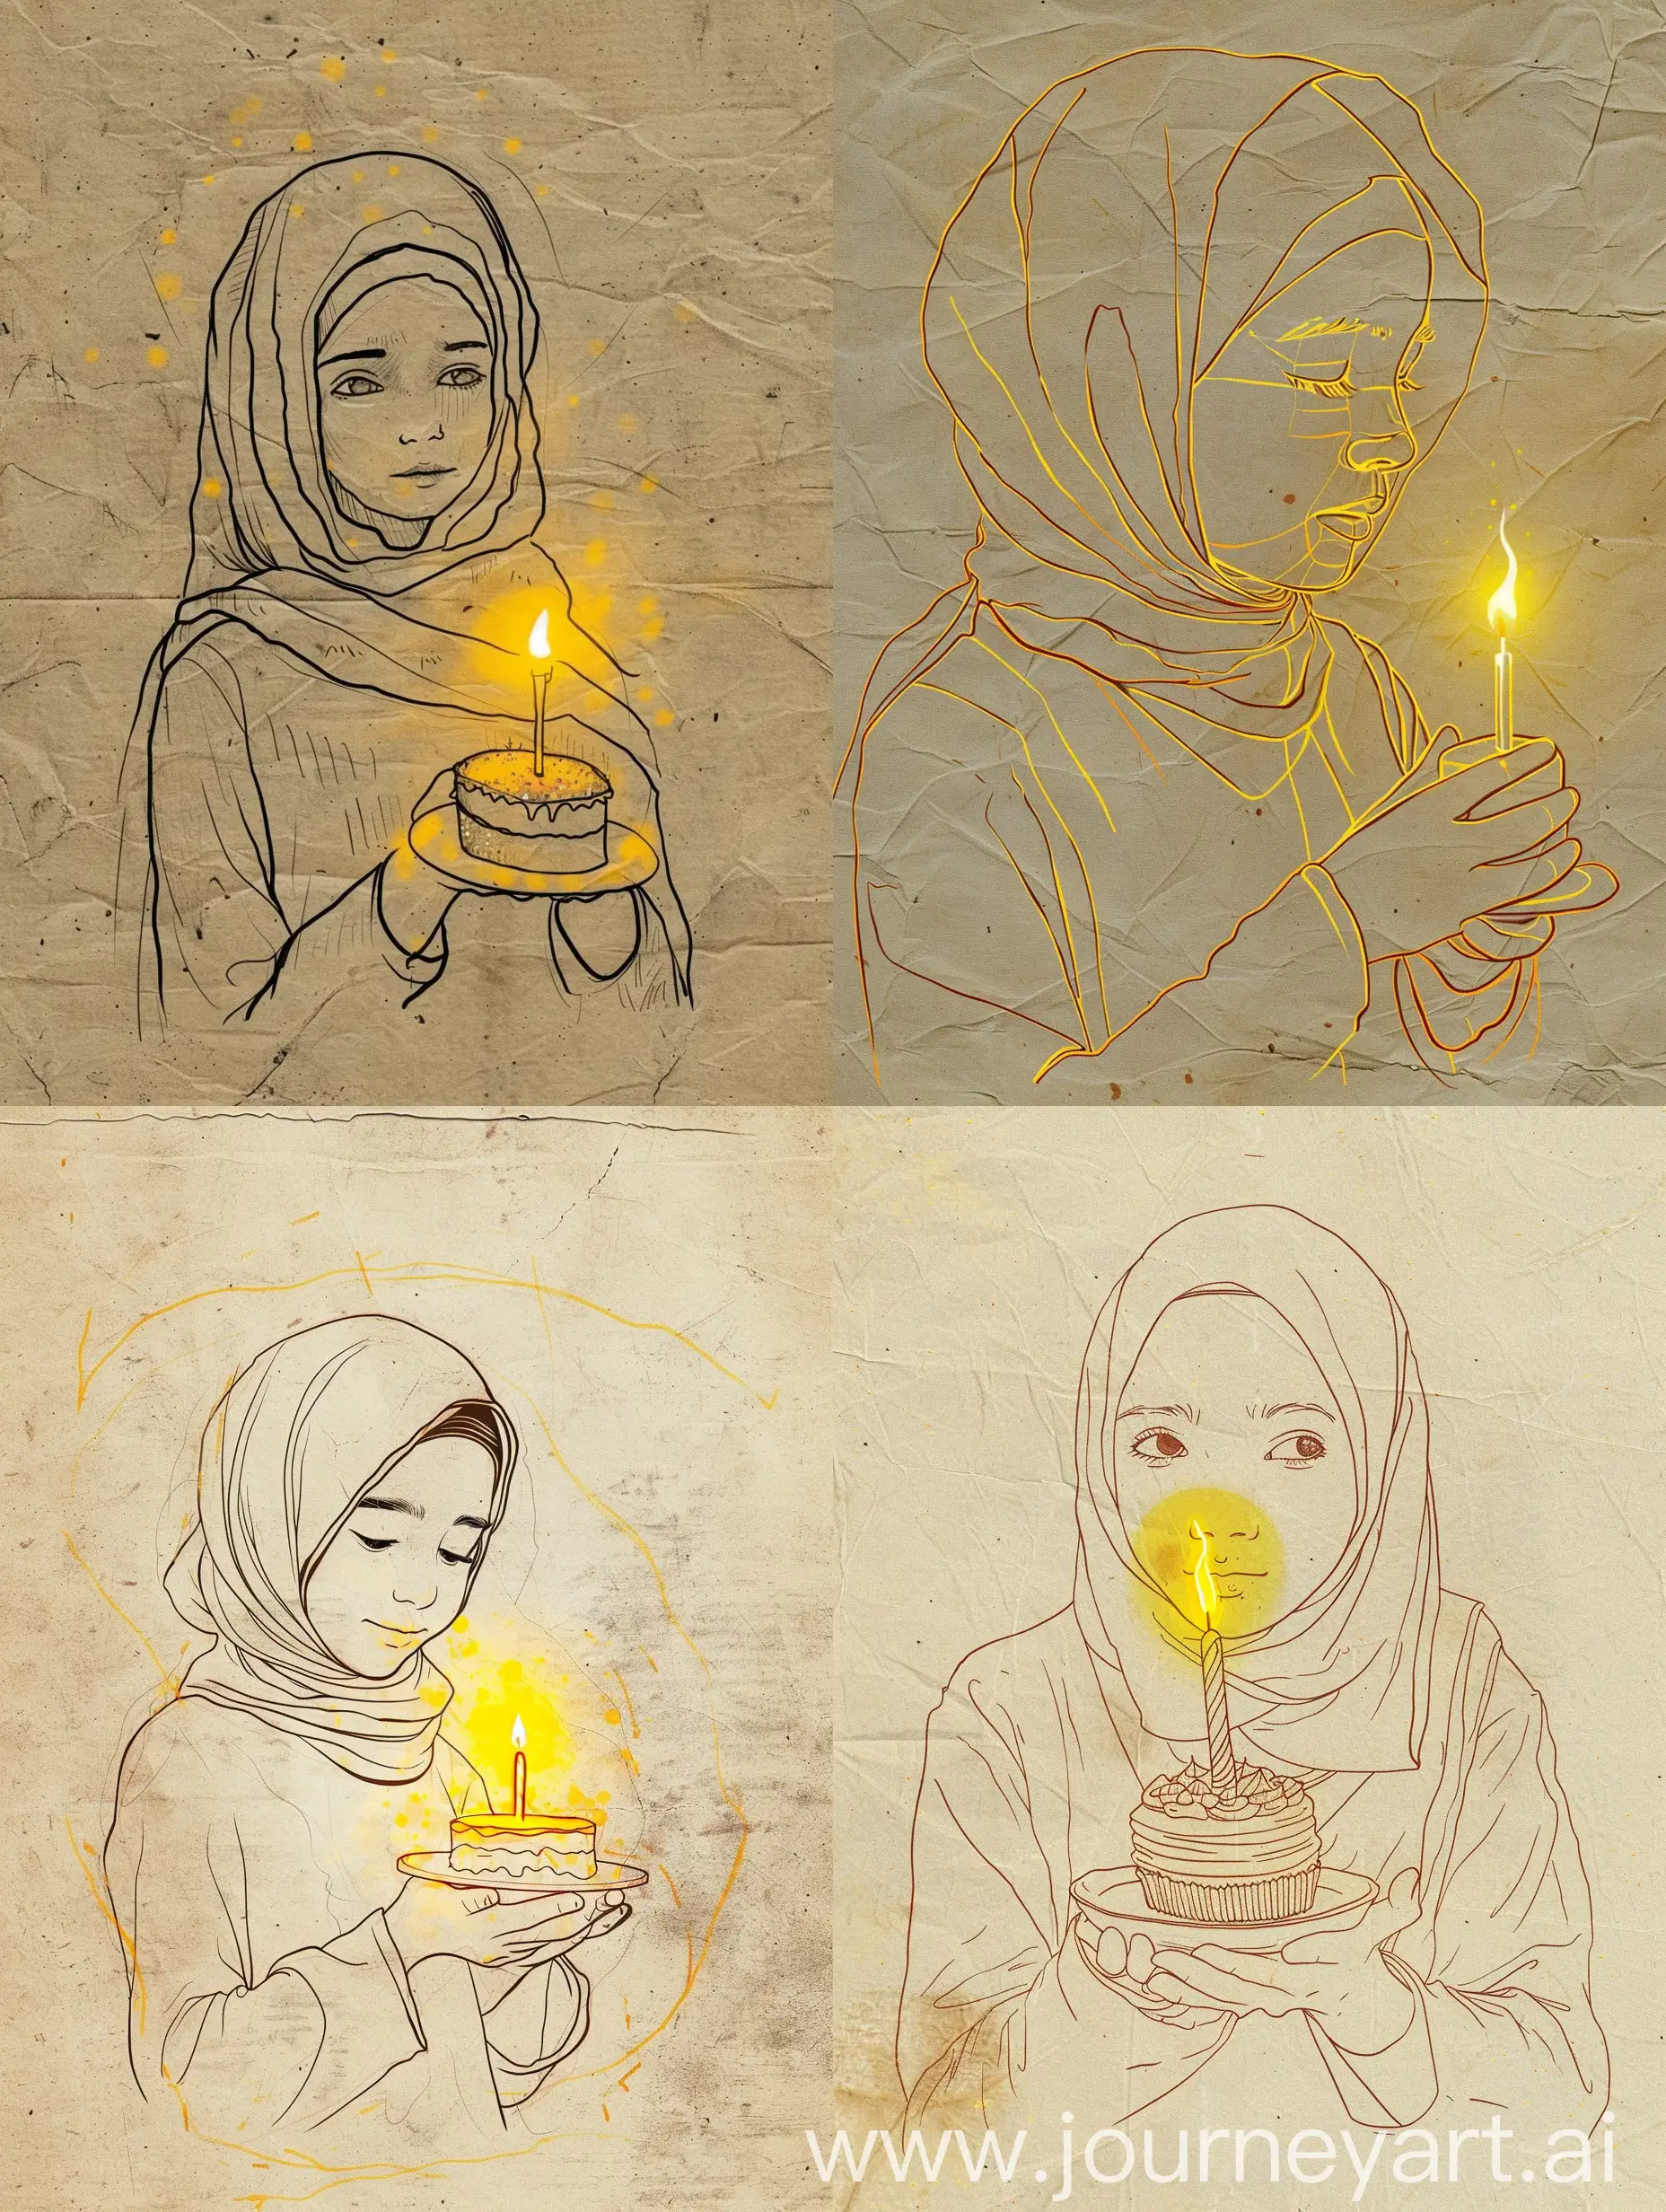 a very simple and minimalist outline sketch/line drawing portrait on old paper depicts a young girl hijab holding a small cake with one lit candle on it. The yellow light from the candle illuminates her face in the drawing, creating the illusion of three-dimensional depth on the minimalist outline illustration. 